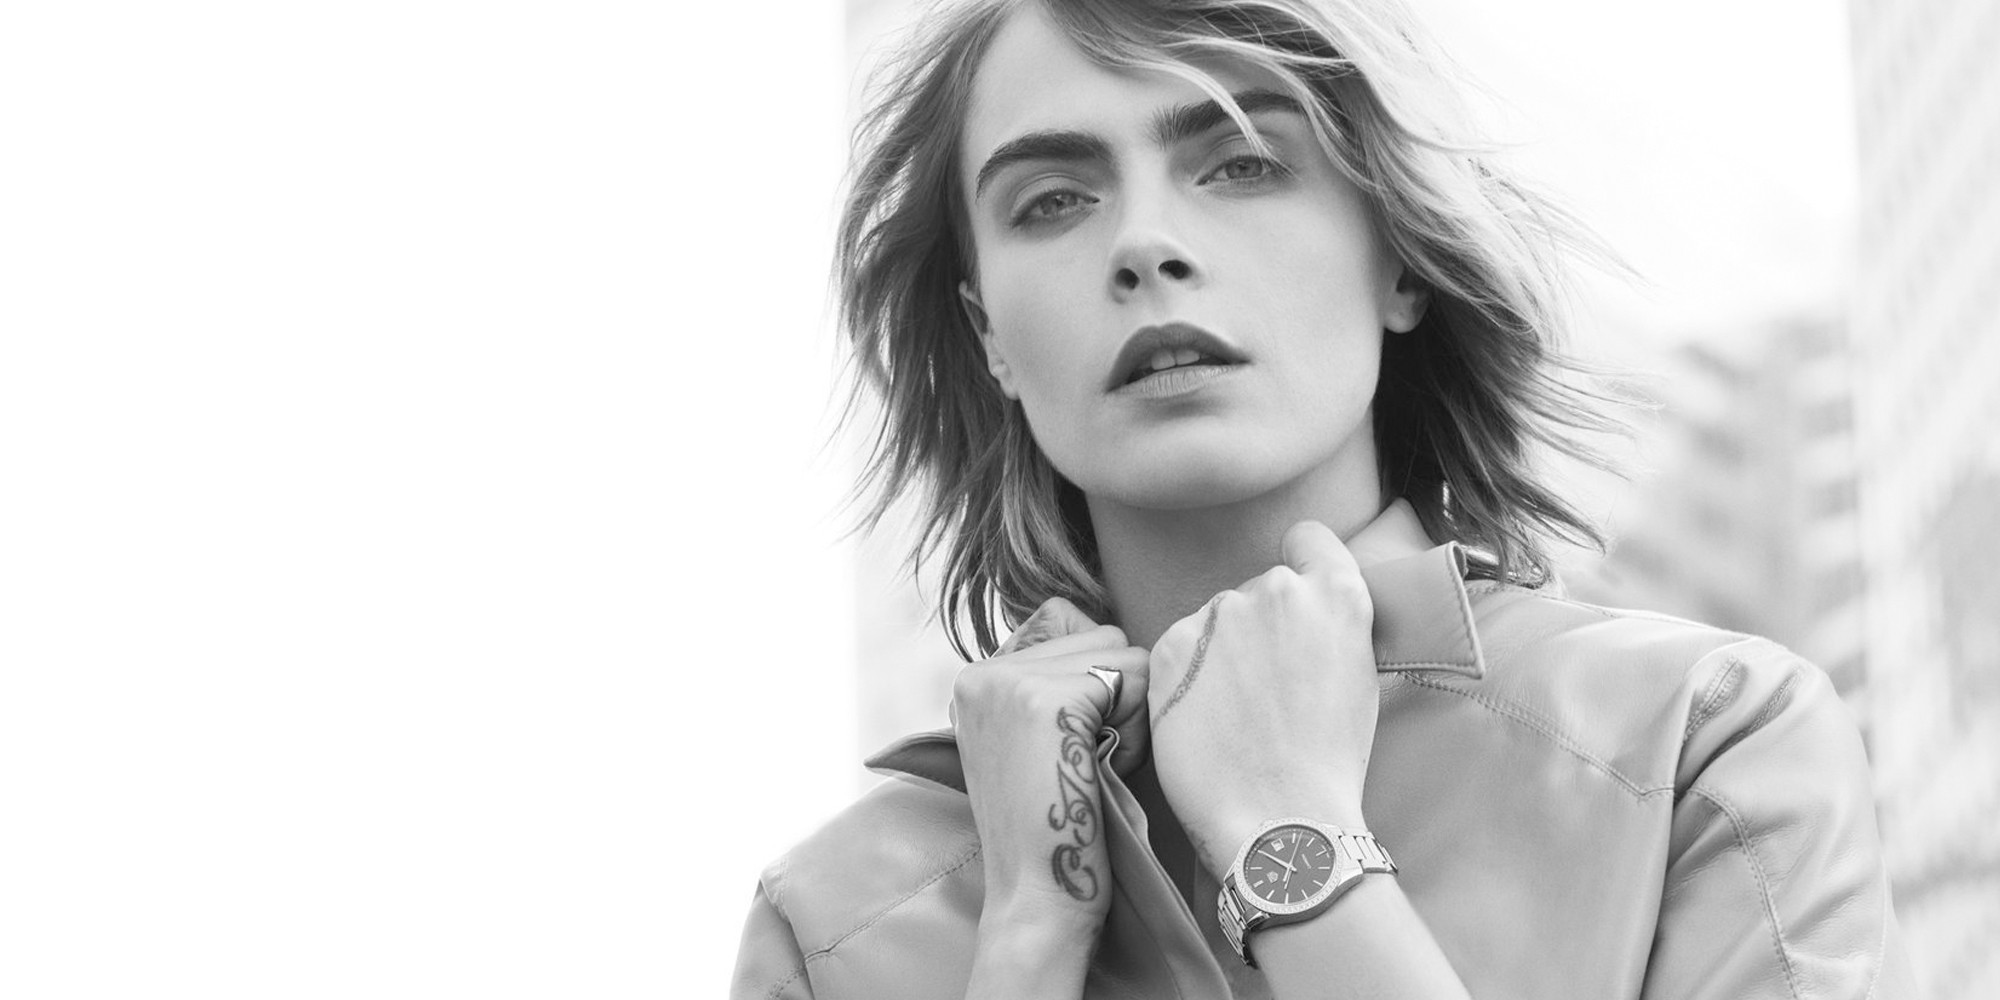 TAG HEUER CARRERA LADY TIMEPIECE CAMPAIGN FEATURING CARA DELEVINGNE